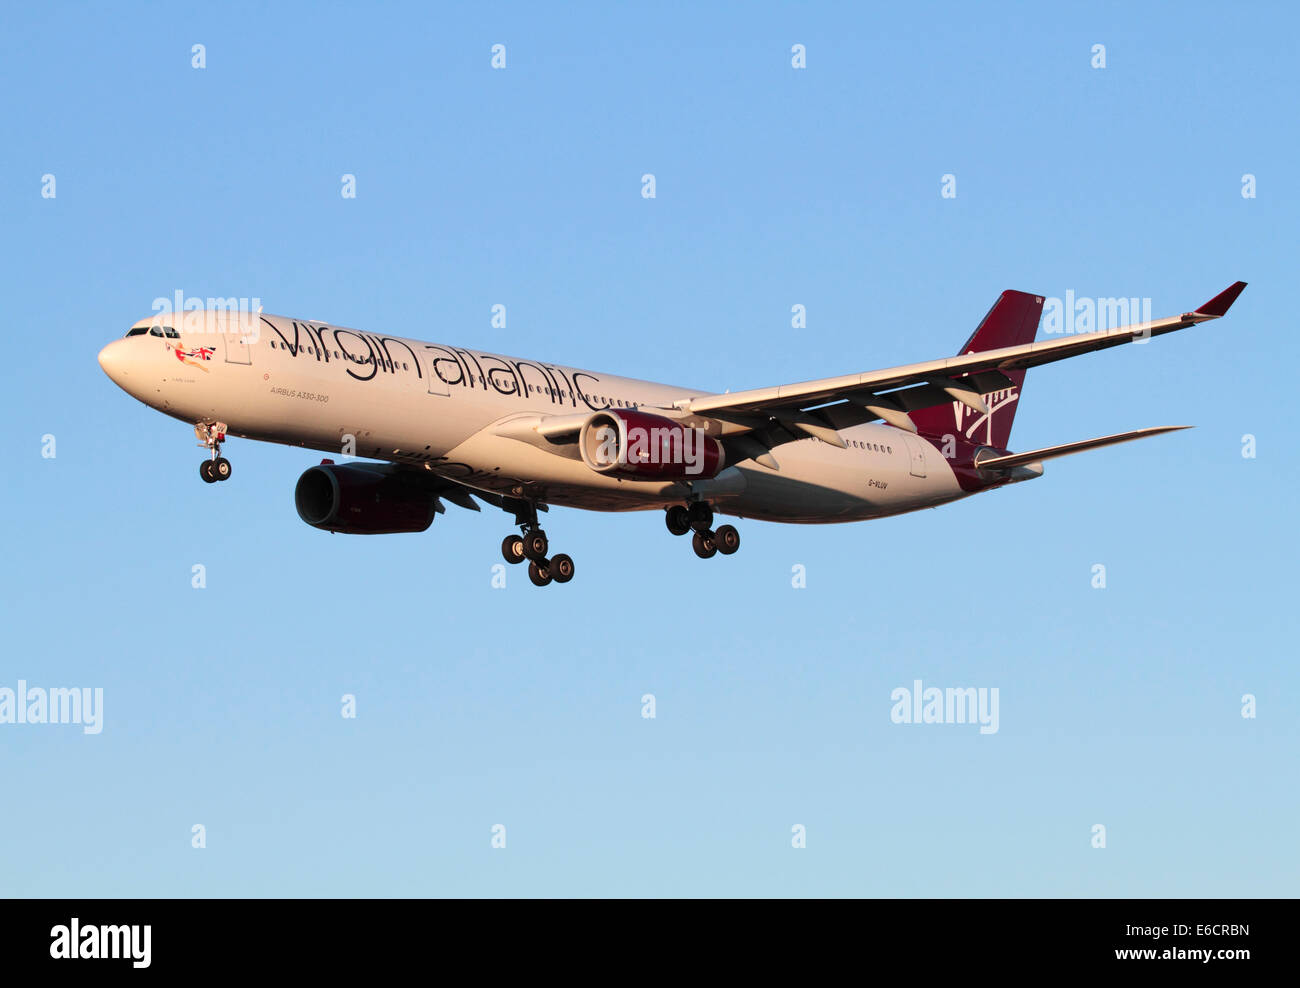 Virgin Atlantic Airways Airbus A330-300 commercial jet plane flying on approach at sunset against a clear blue sky. Long haul air travel and flights. Stock Photo